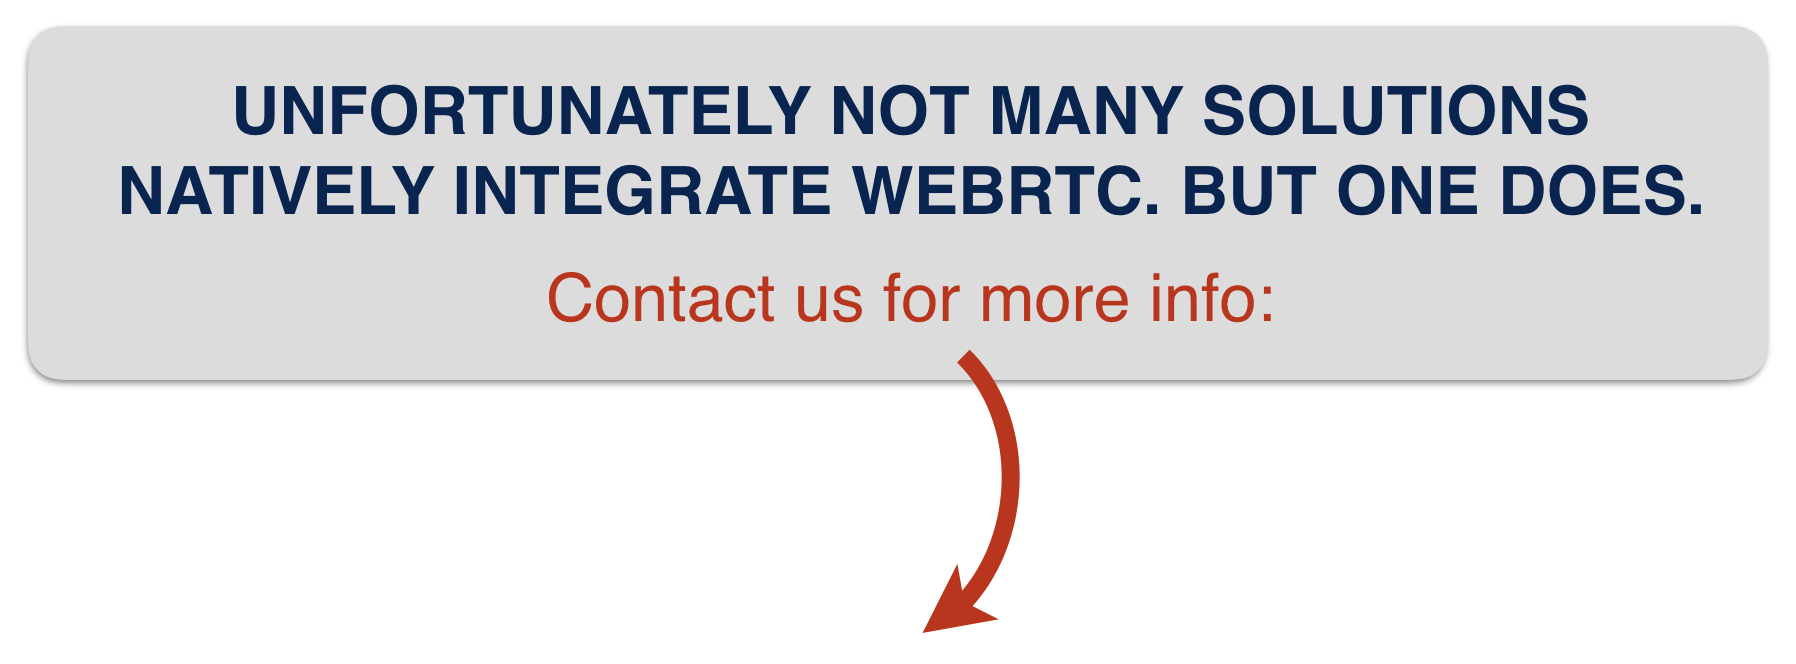 UNFORTUNATELY NOT MANY SOLUTIONS NATIVELY INTEGRATE WEBRTC. BUT ONE DOES. Contact us!